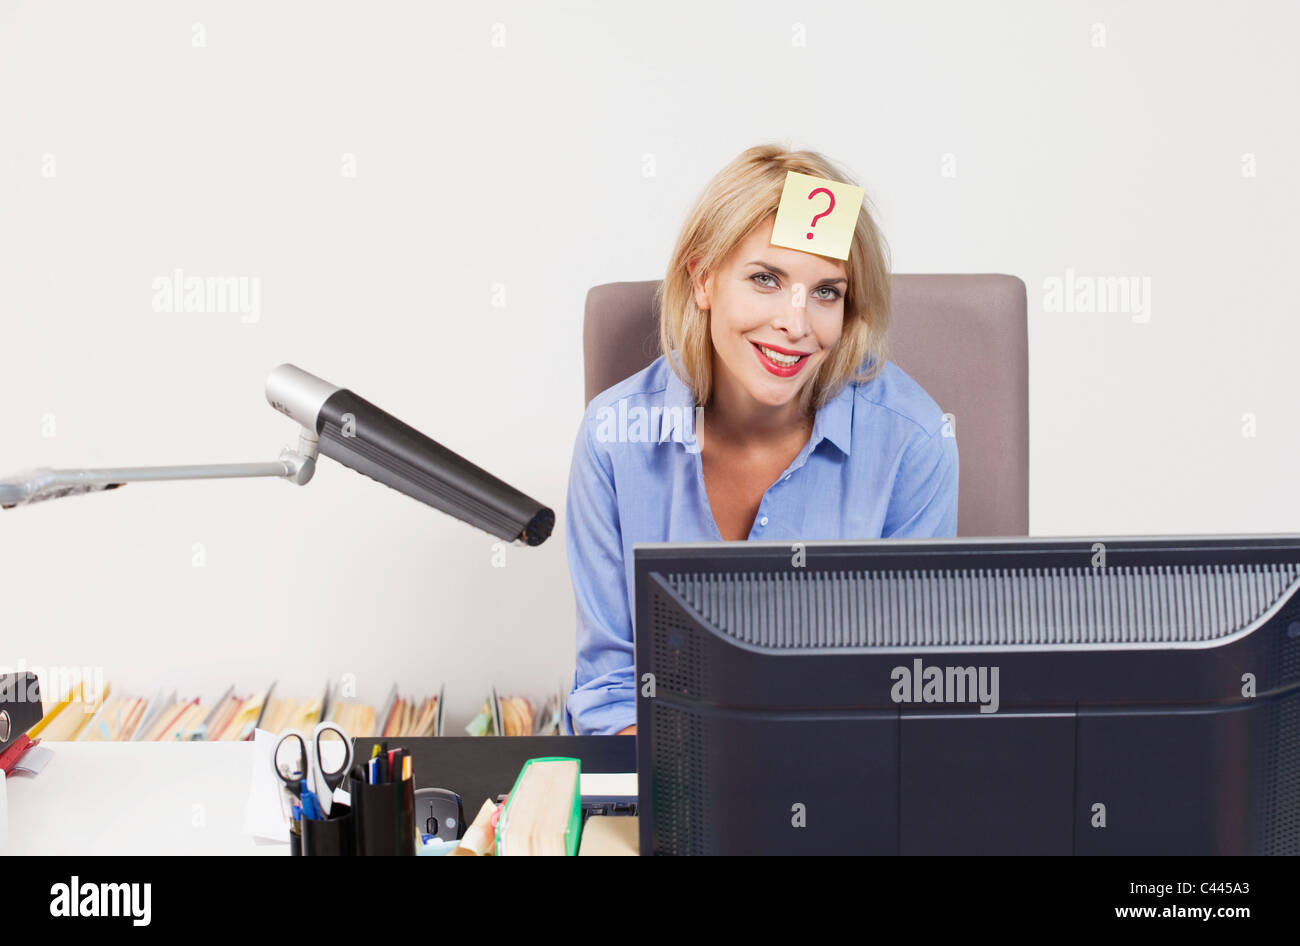 A woman sitting at an office desk with an adhesive note on her forehead Stock Photo